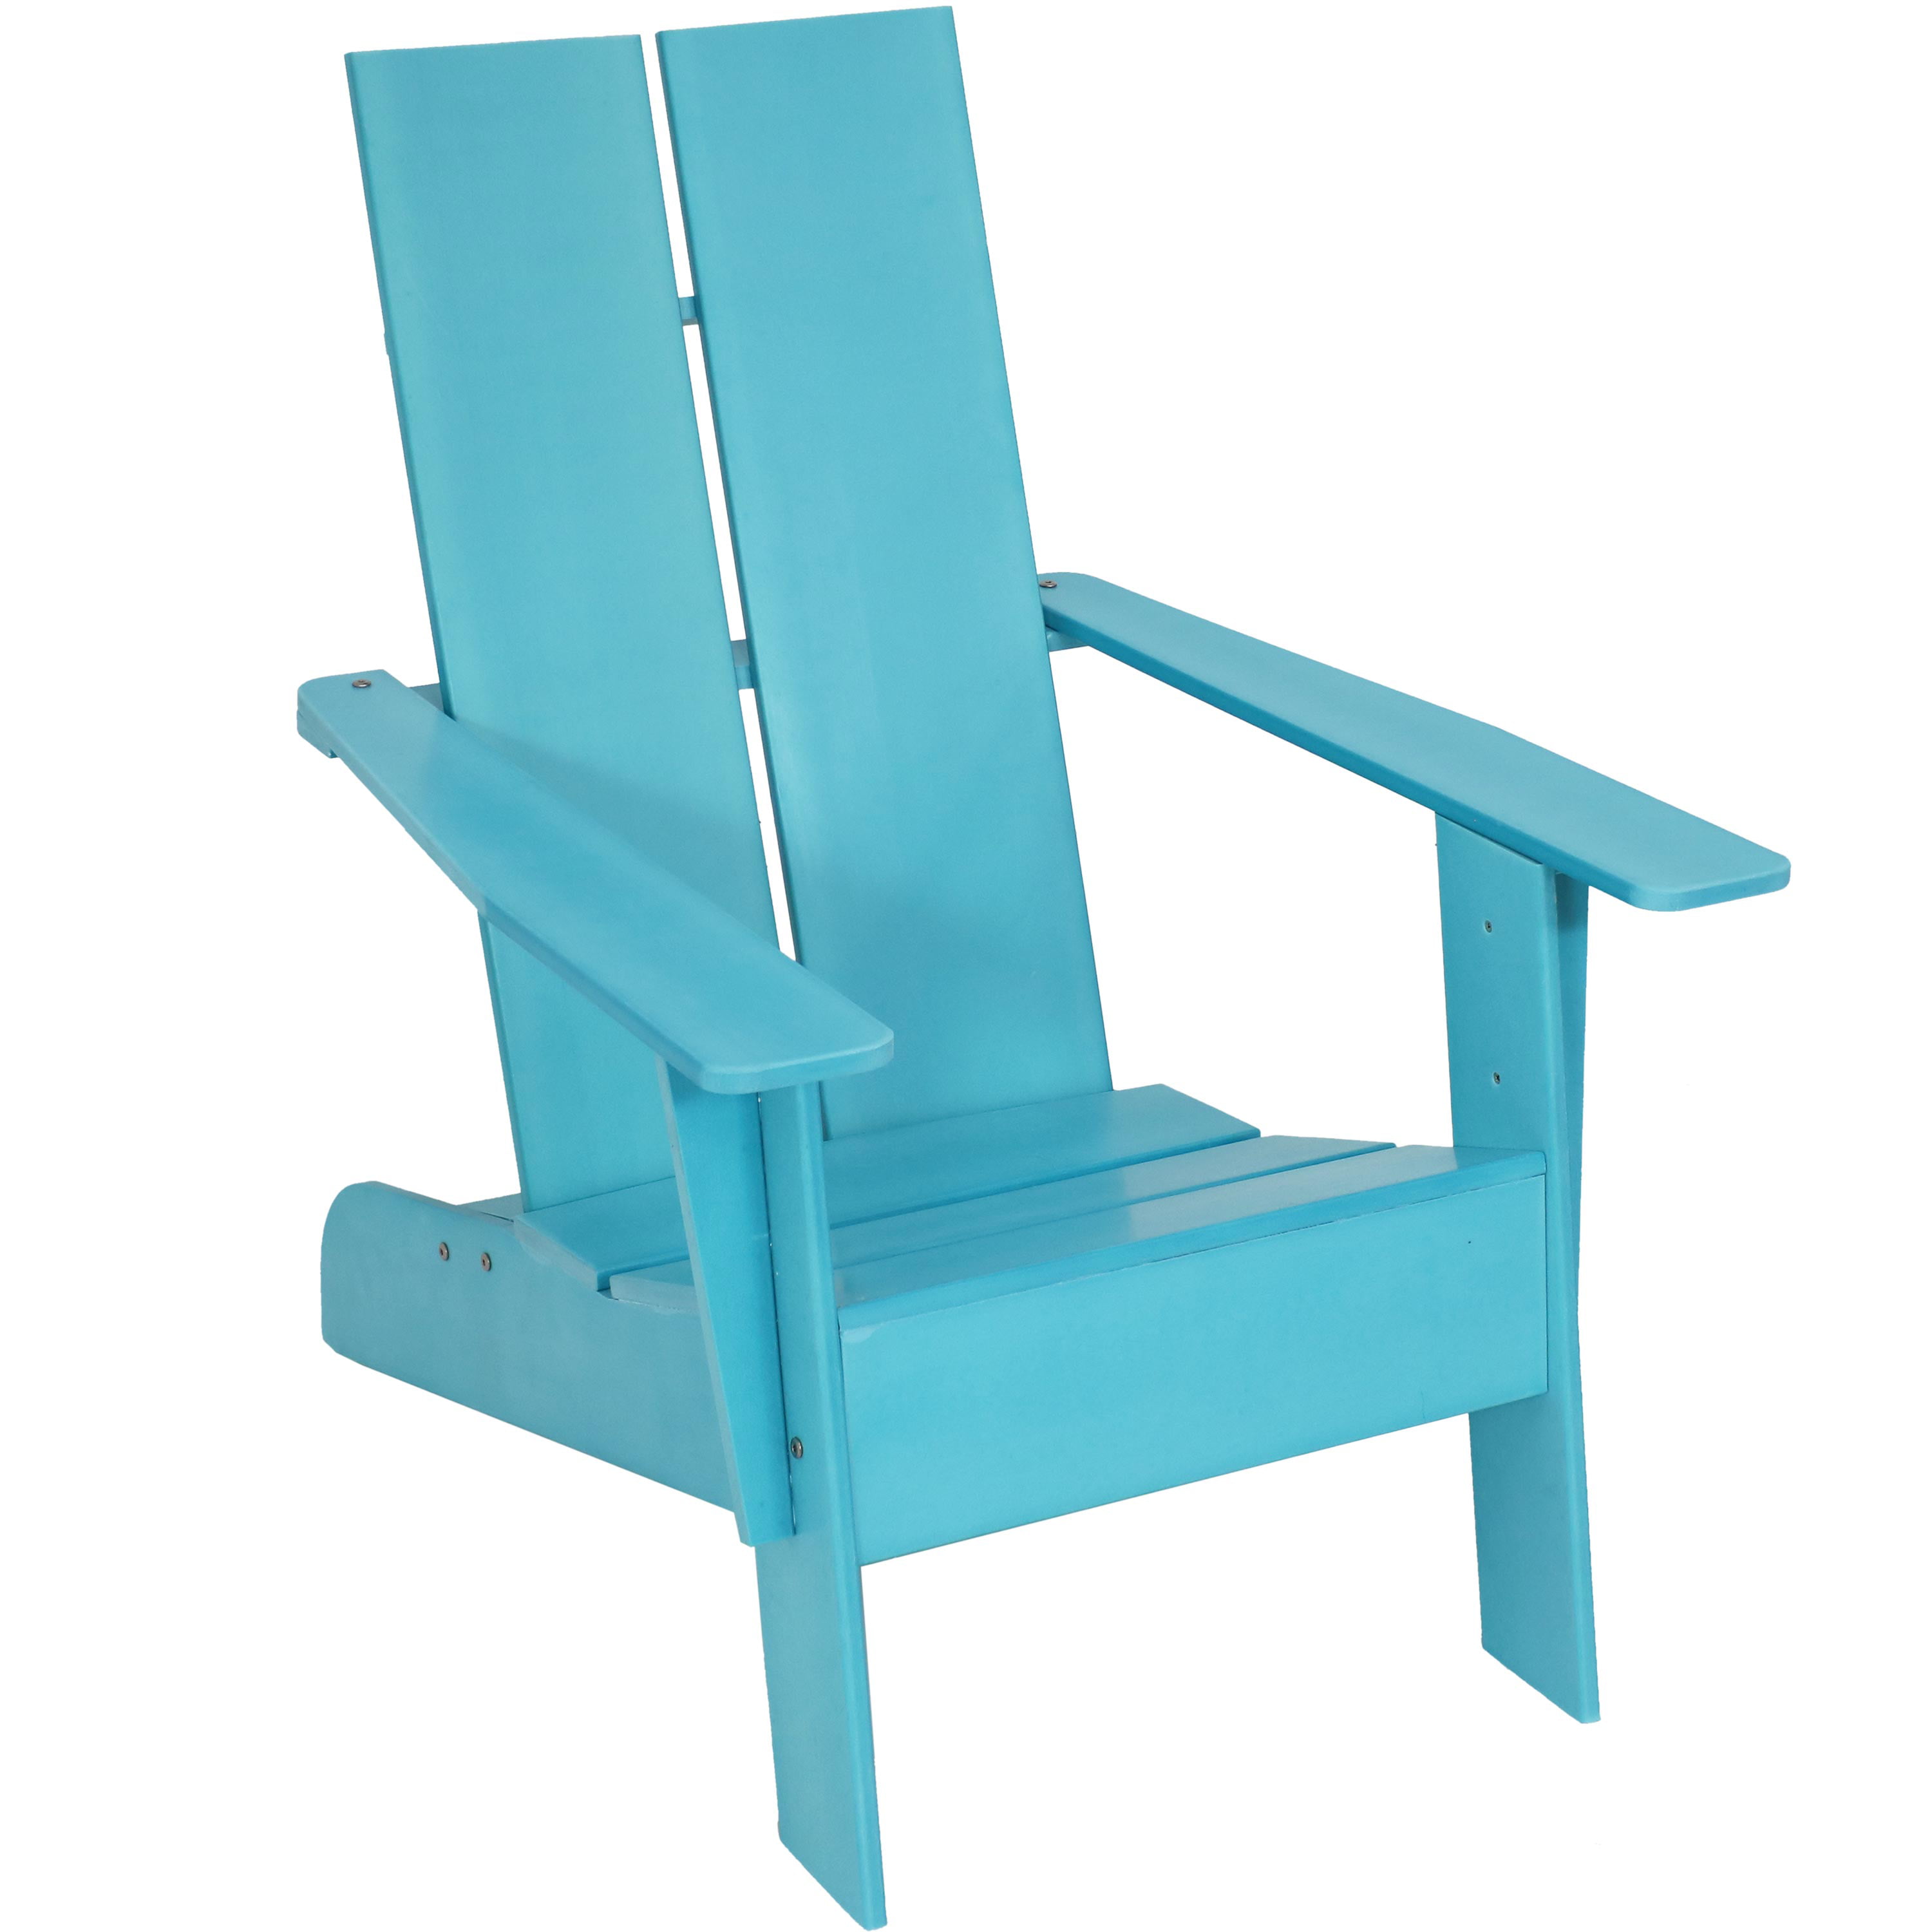 Porch Blue Yard Waterproof and Weather-Resistant Faux Wood HDPE Outside Patio Seating Deck Lawn Sunnydaze Carnlough Outdoor Modern Adirondack Chair Balcony and Garden Furniture 